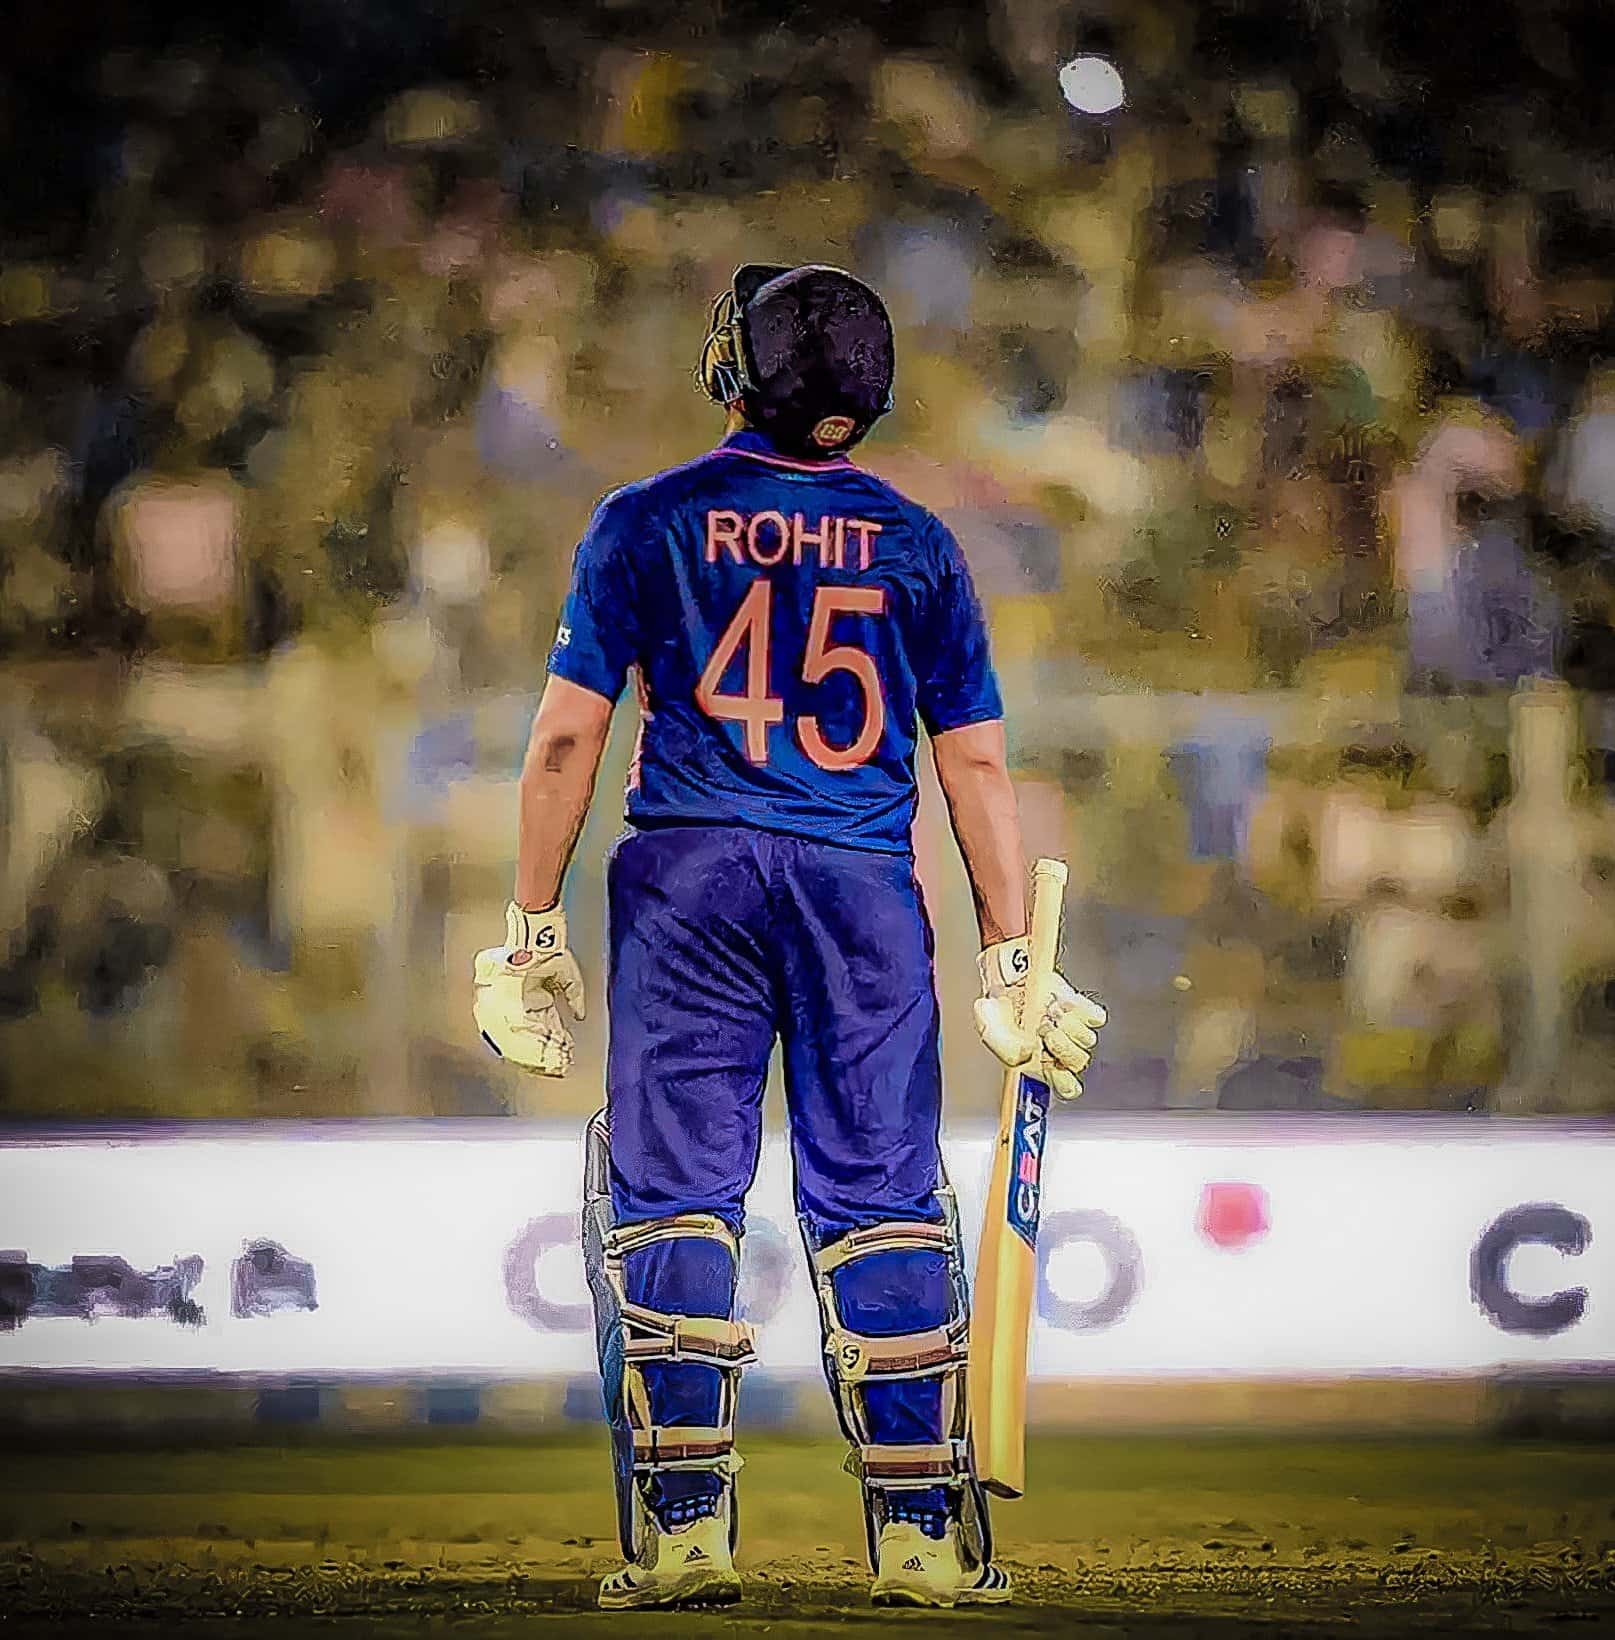 rohit sharma back wallpapers